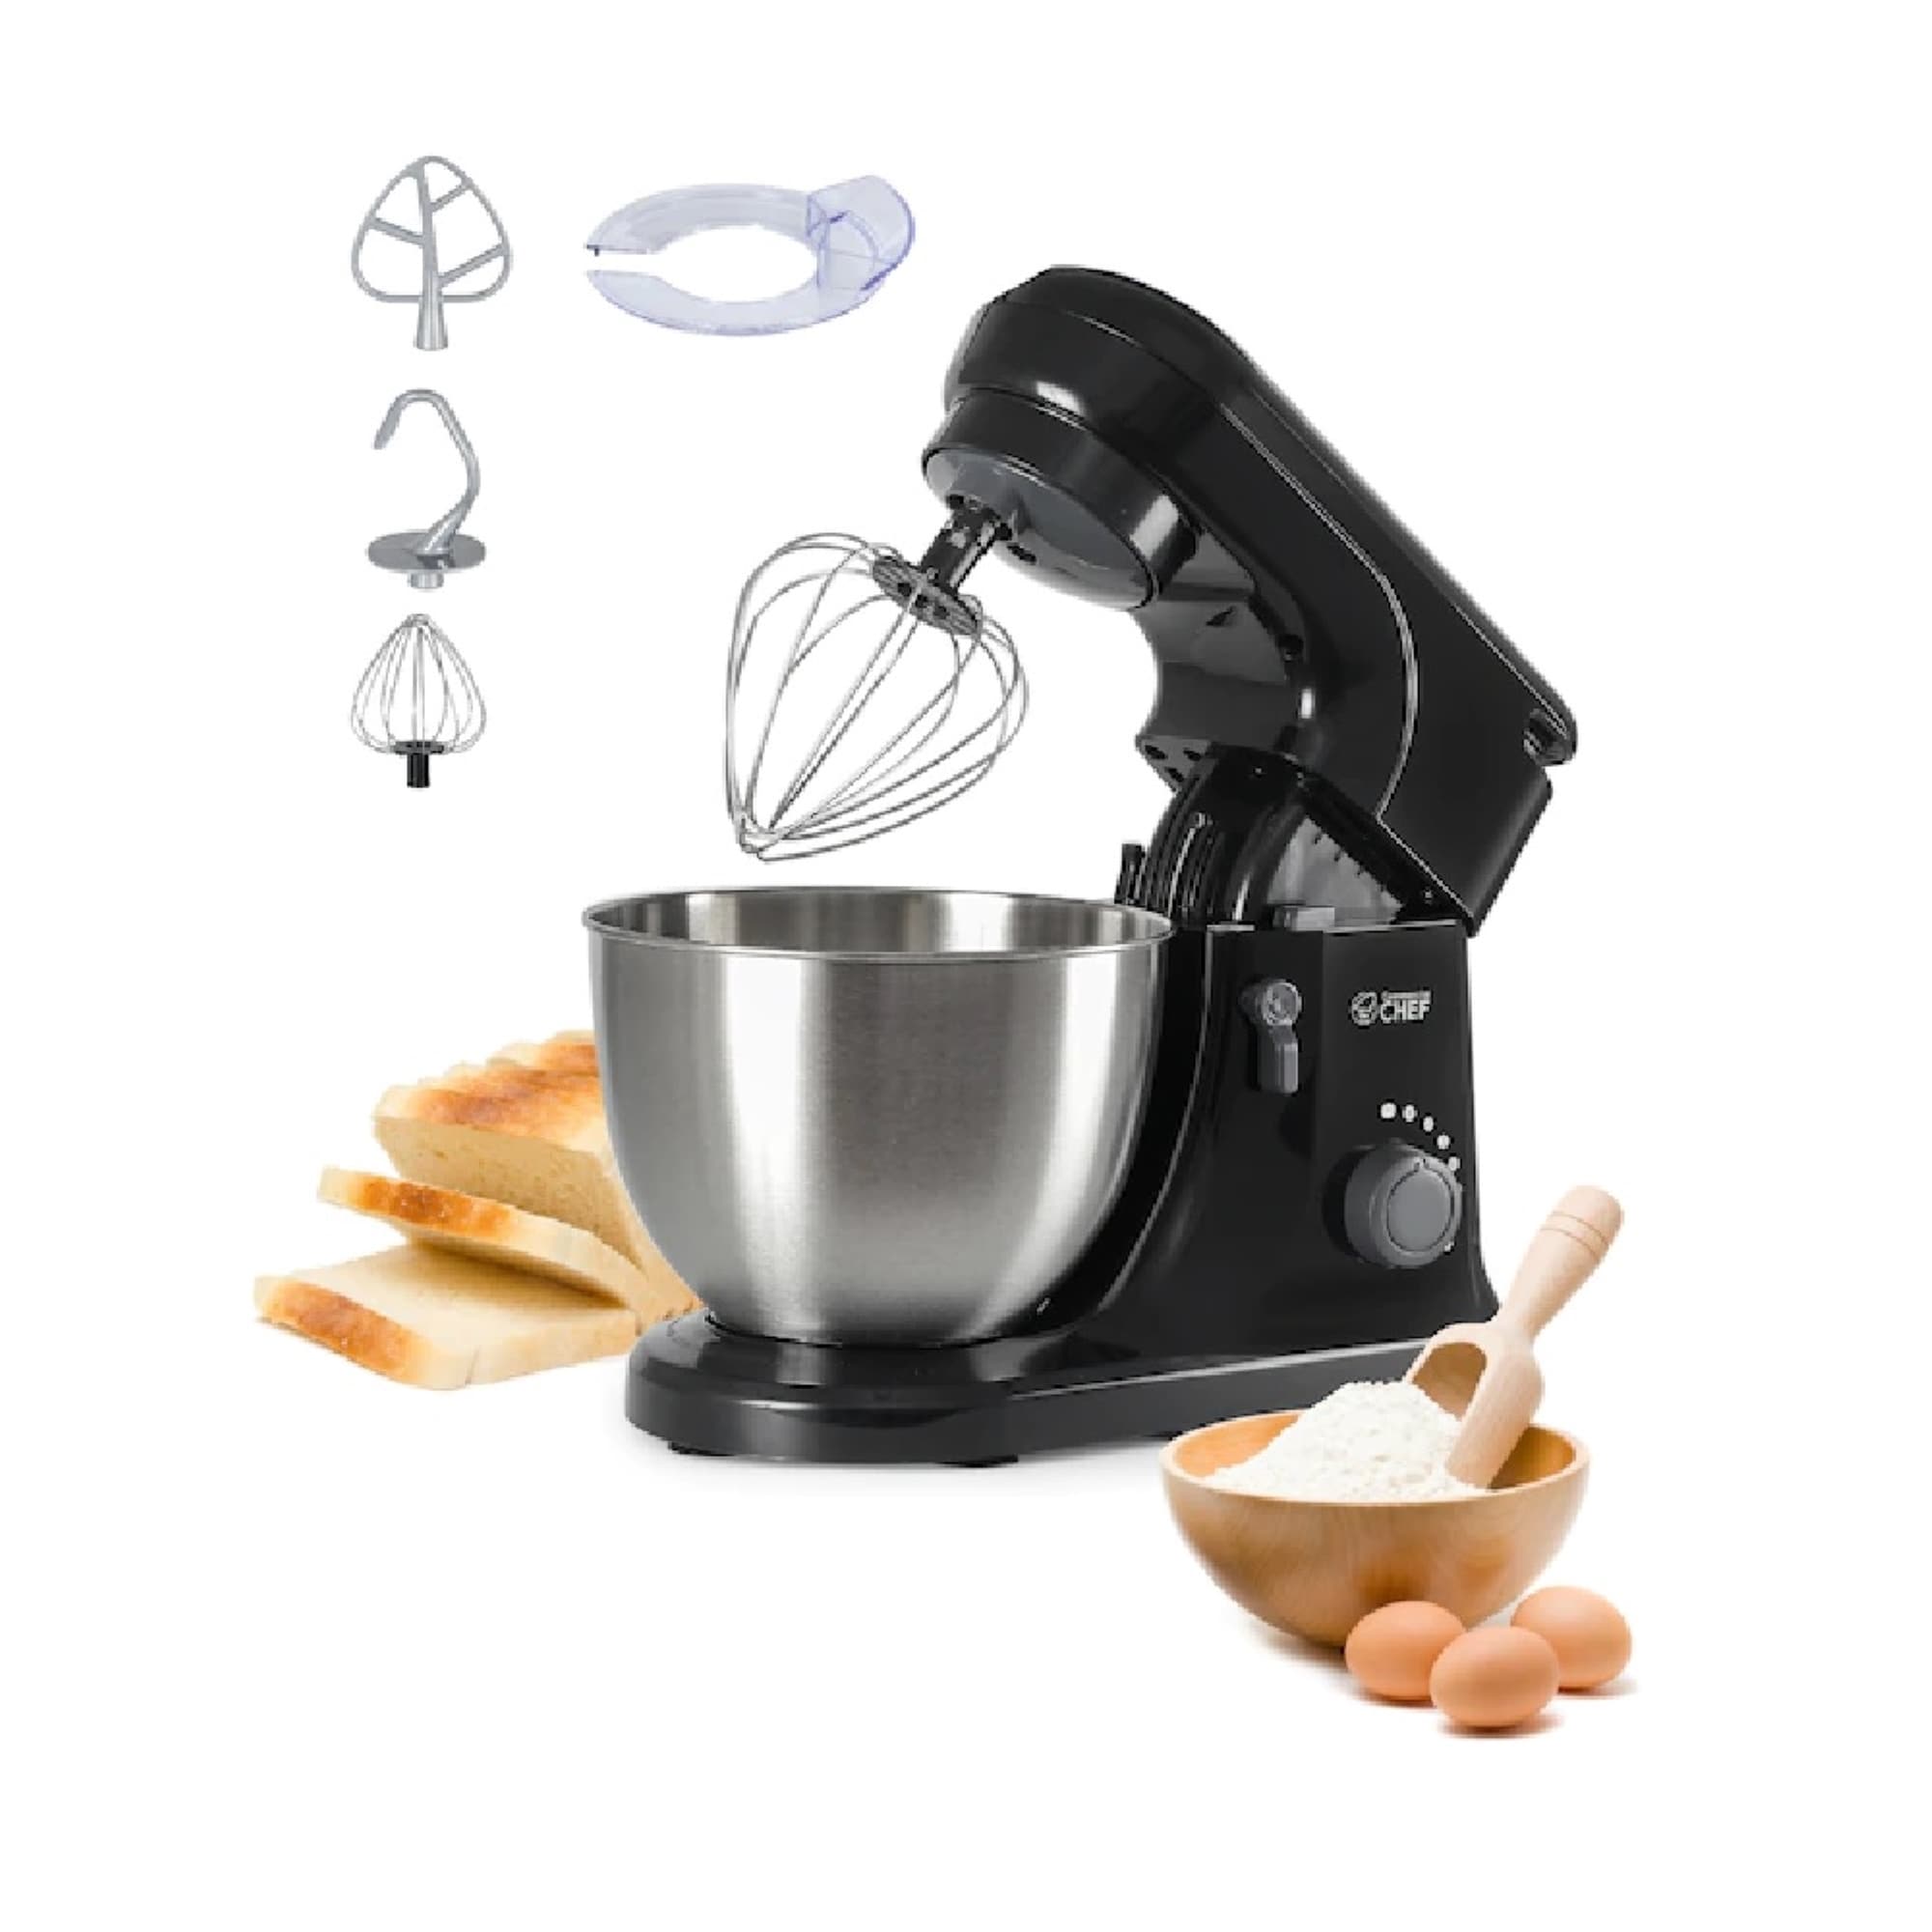 https://ak1.ostkcdn.com/images/products/is/images/direct/46fdbe9ee4f28decc0aaeaa6bb64396bb61bc238/Commercial-Chef-4.7-Qt-7-Speed-Black-Residential-Stand-Mixer.jpg